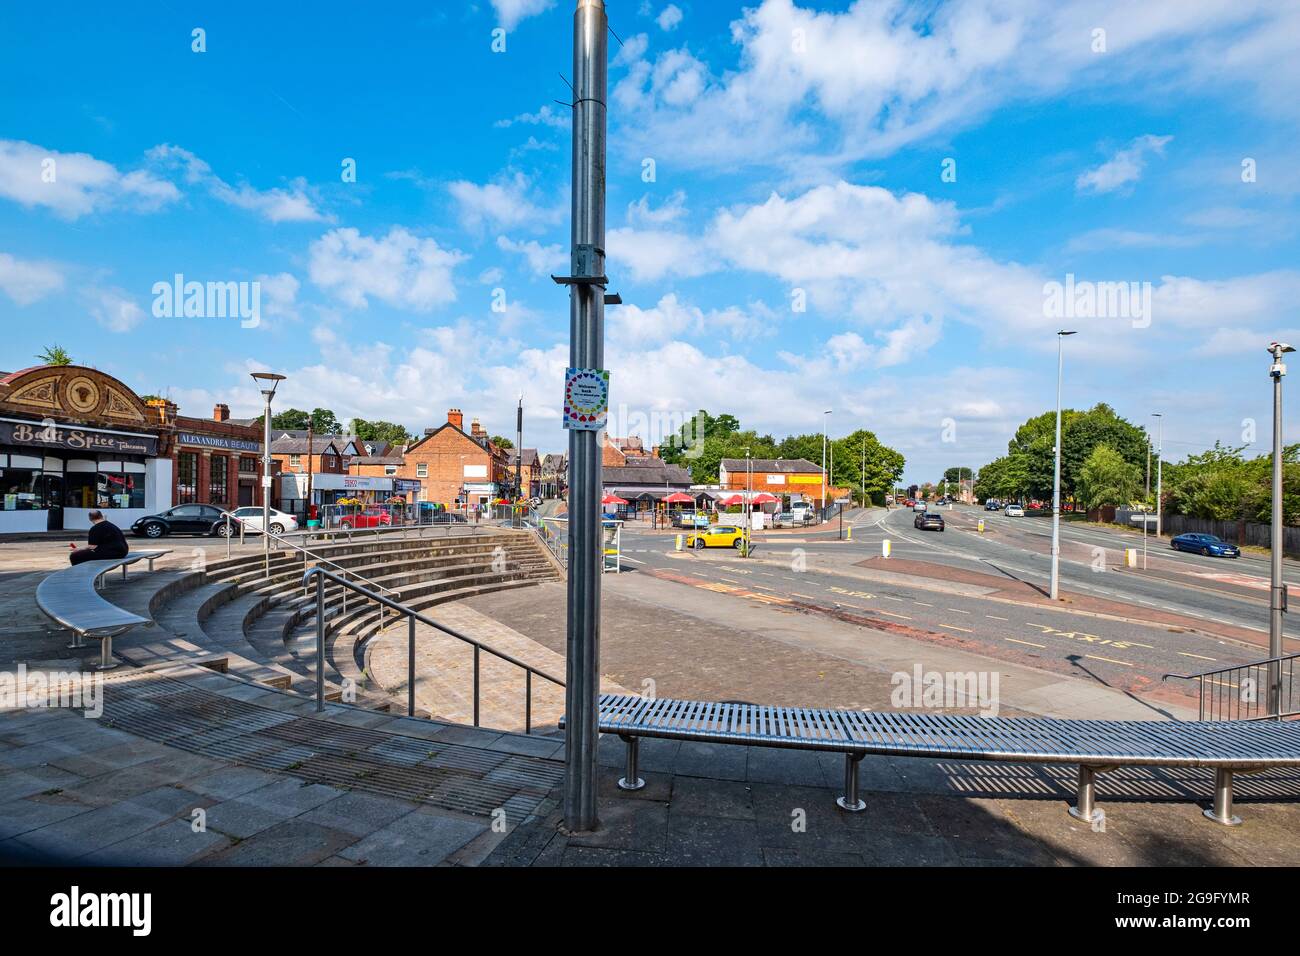 The Bull ring with bus station and bypass or ring road in town centre of Middlewich Cheshire UK Stock Photo